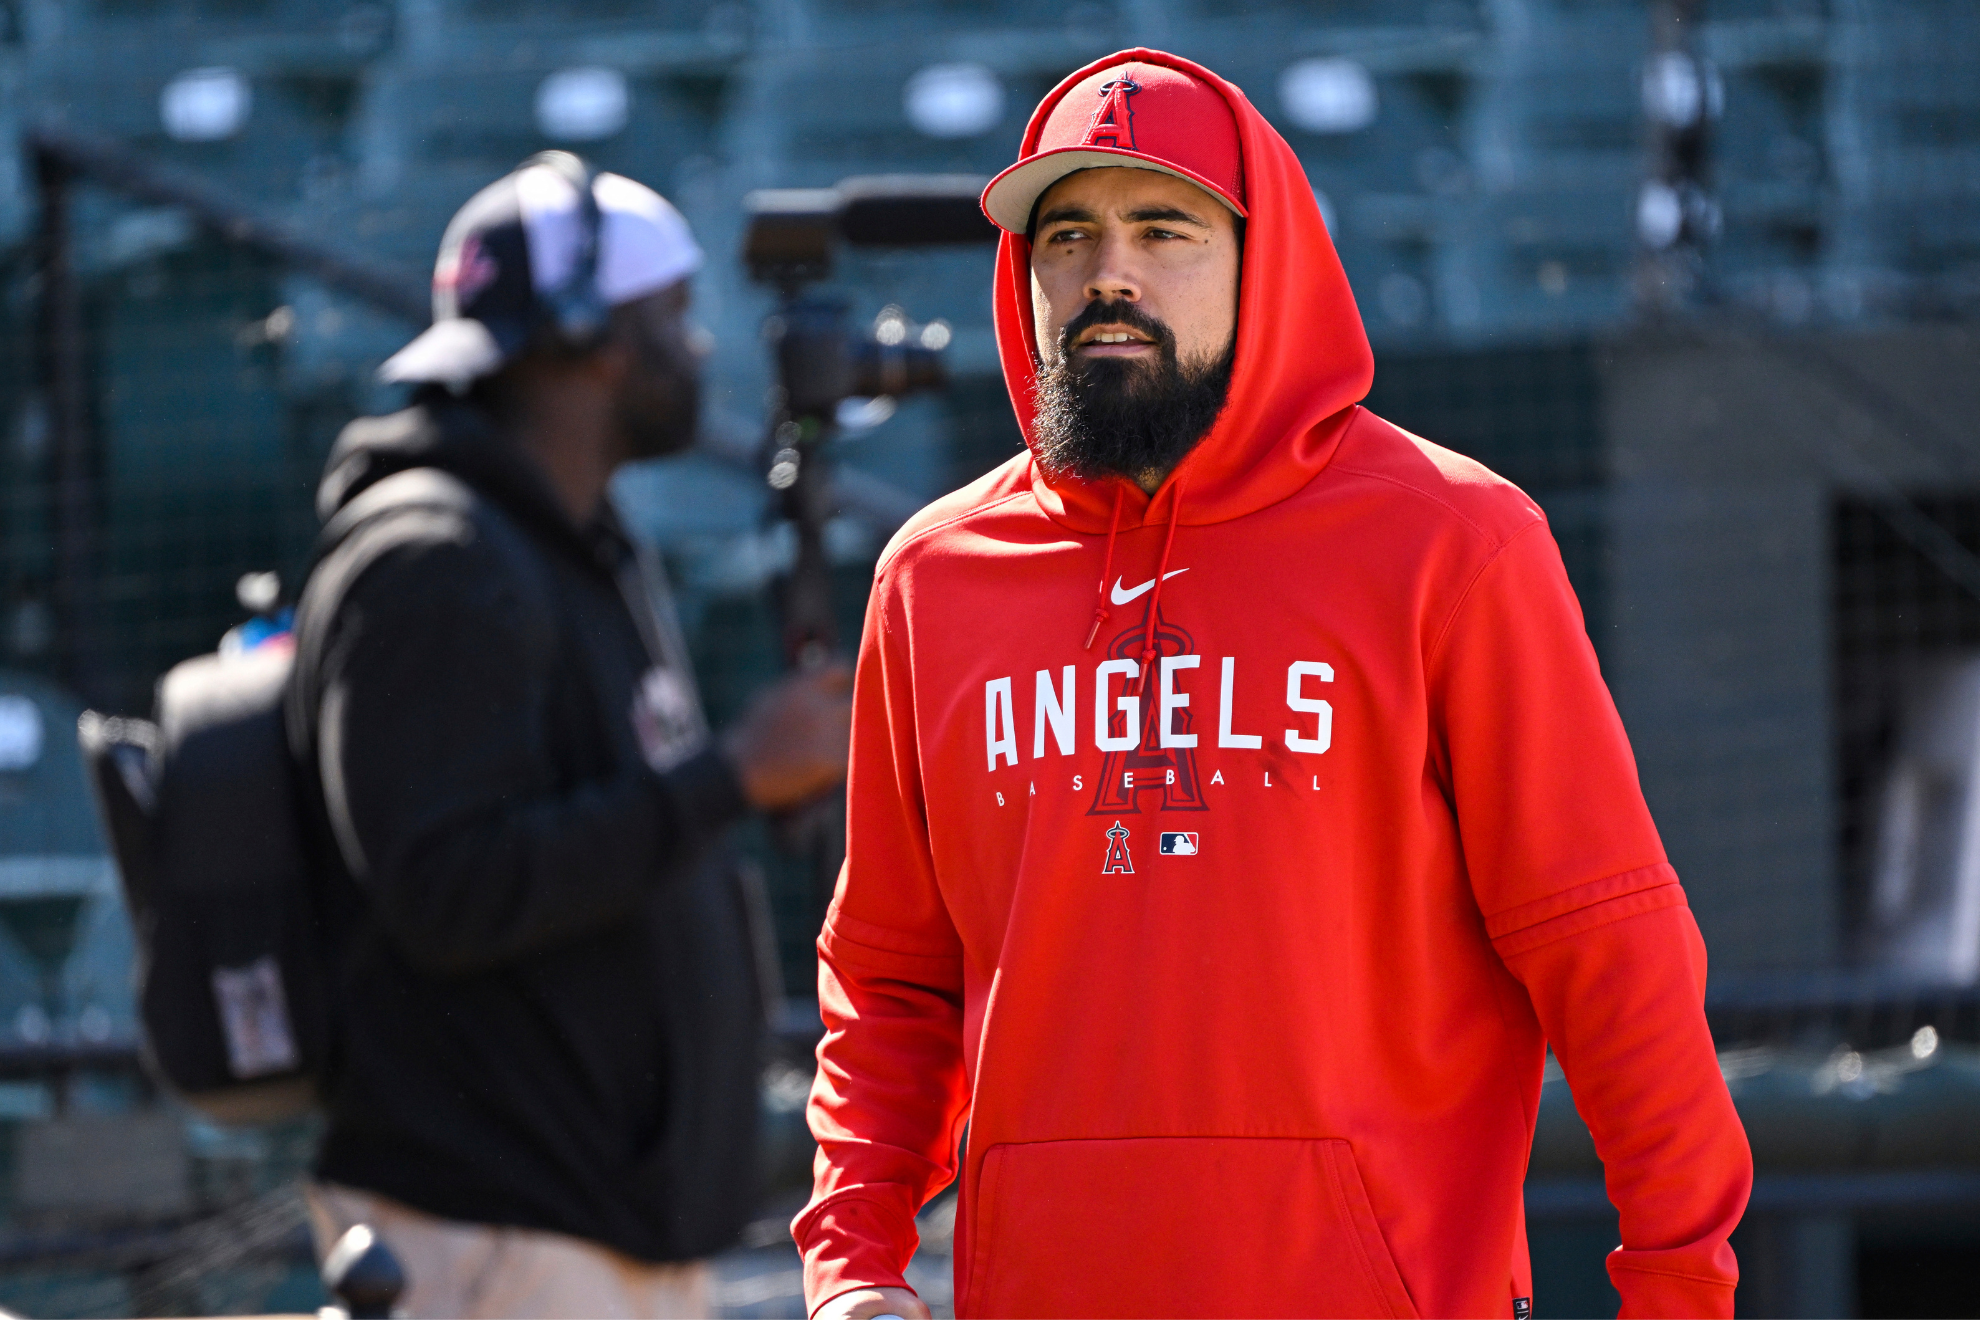 Rendon has played only 200 games in four seasons with the Angels.